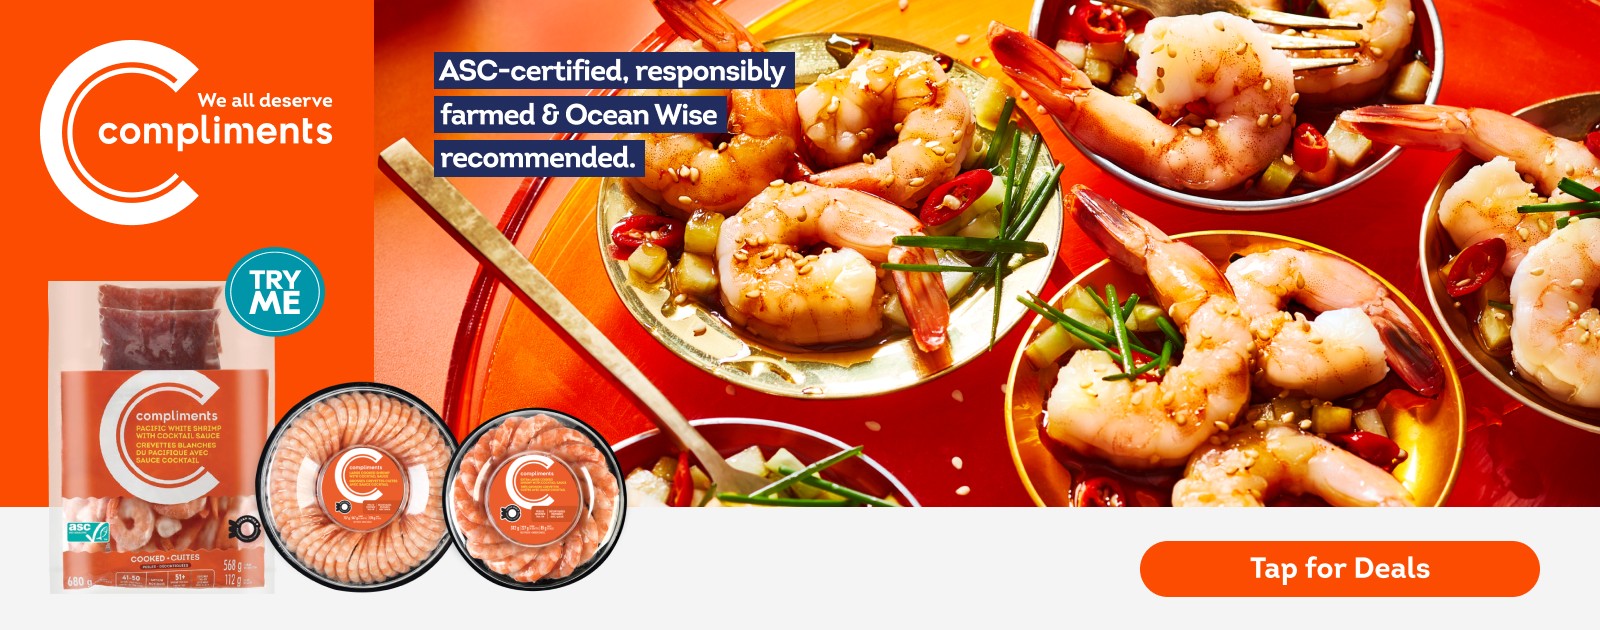 The image has seafood on a copper platter with the following text written on it, "ASC-certified, responsibly farmed & Ocean Wise recommended."